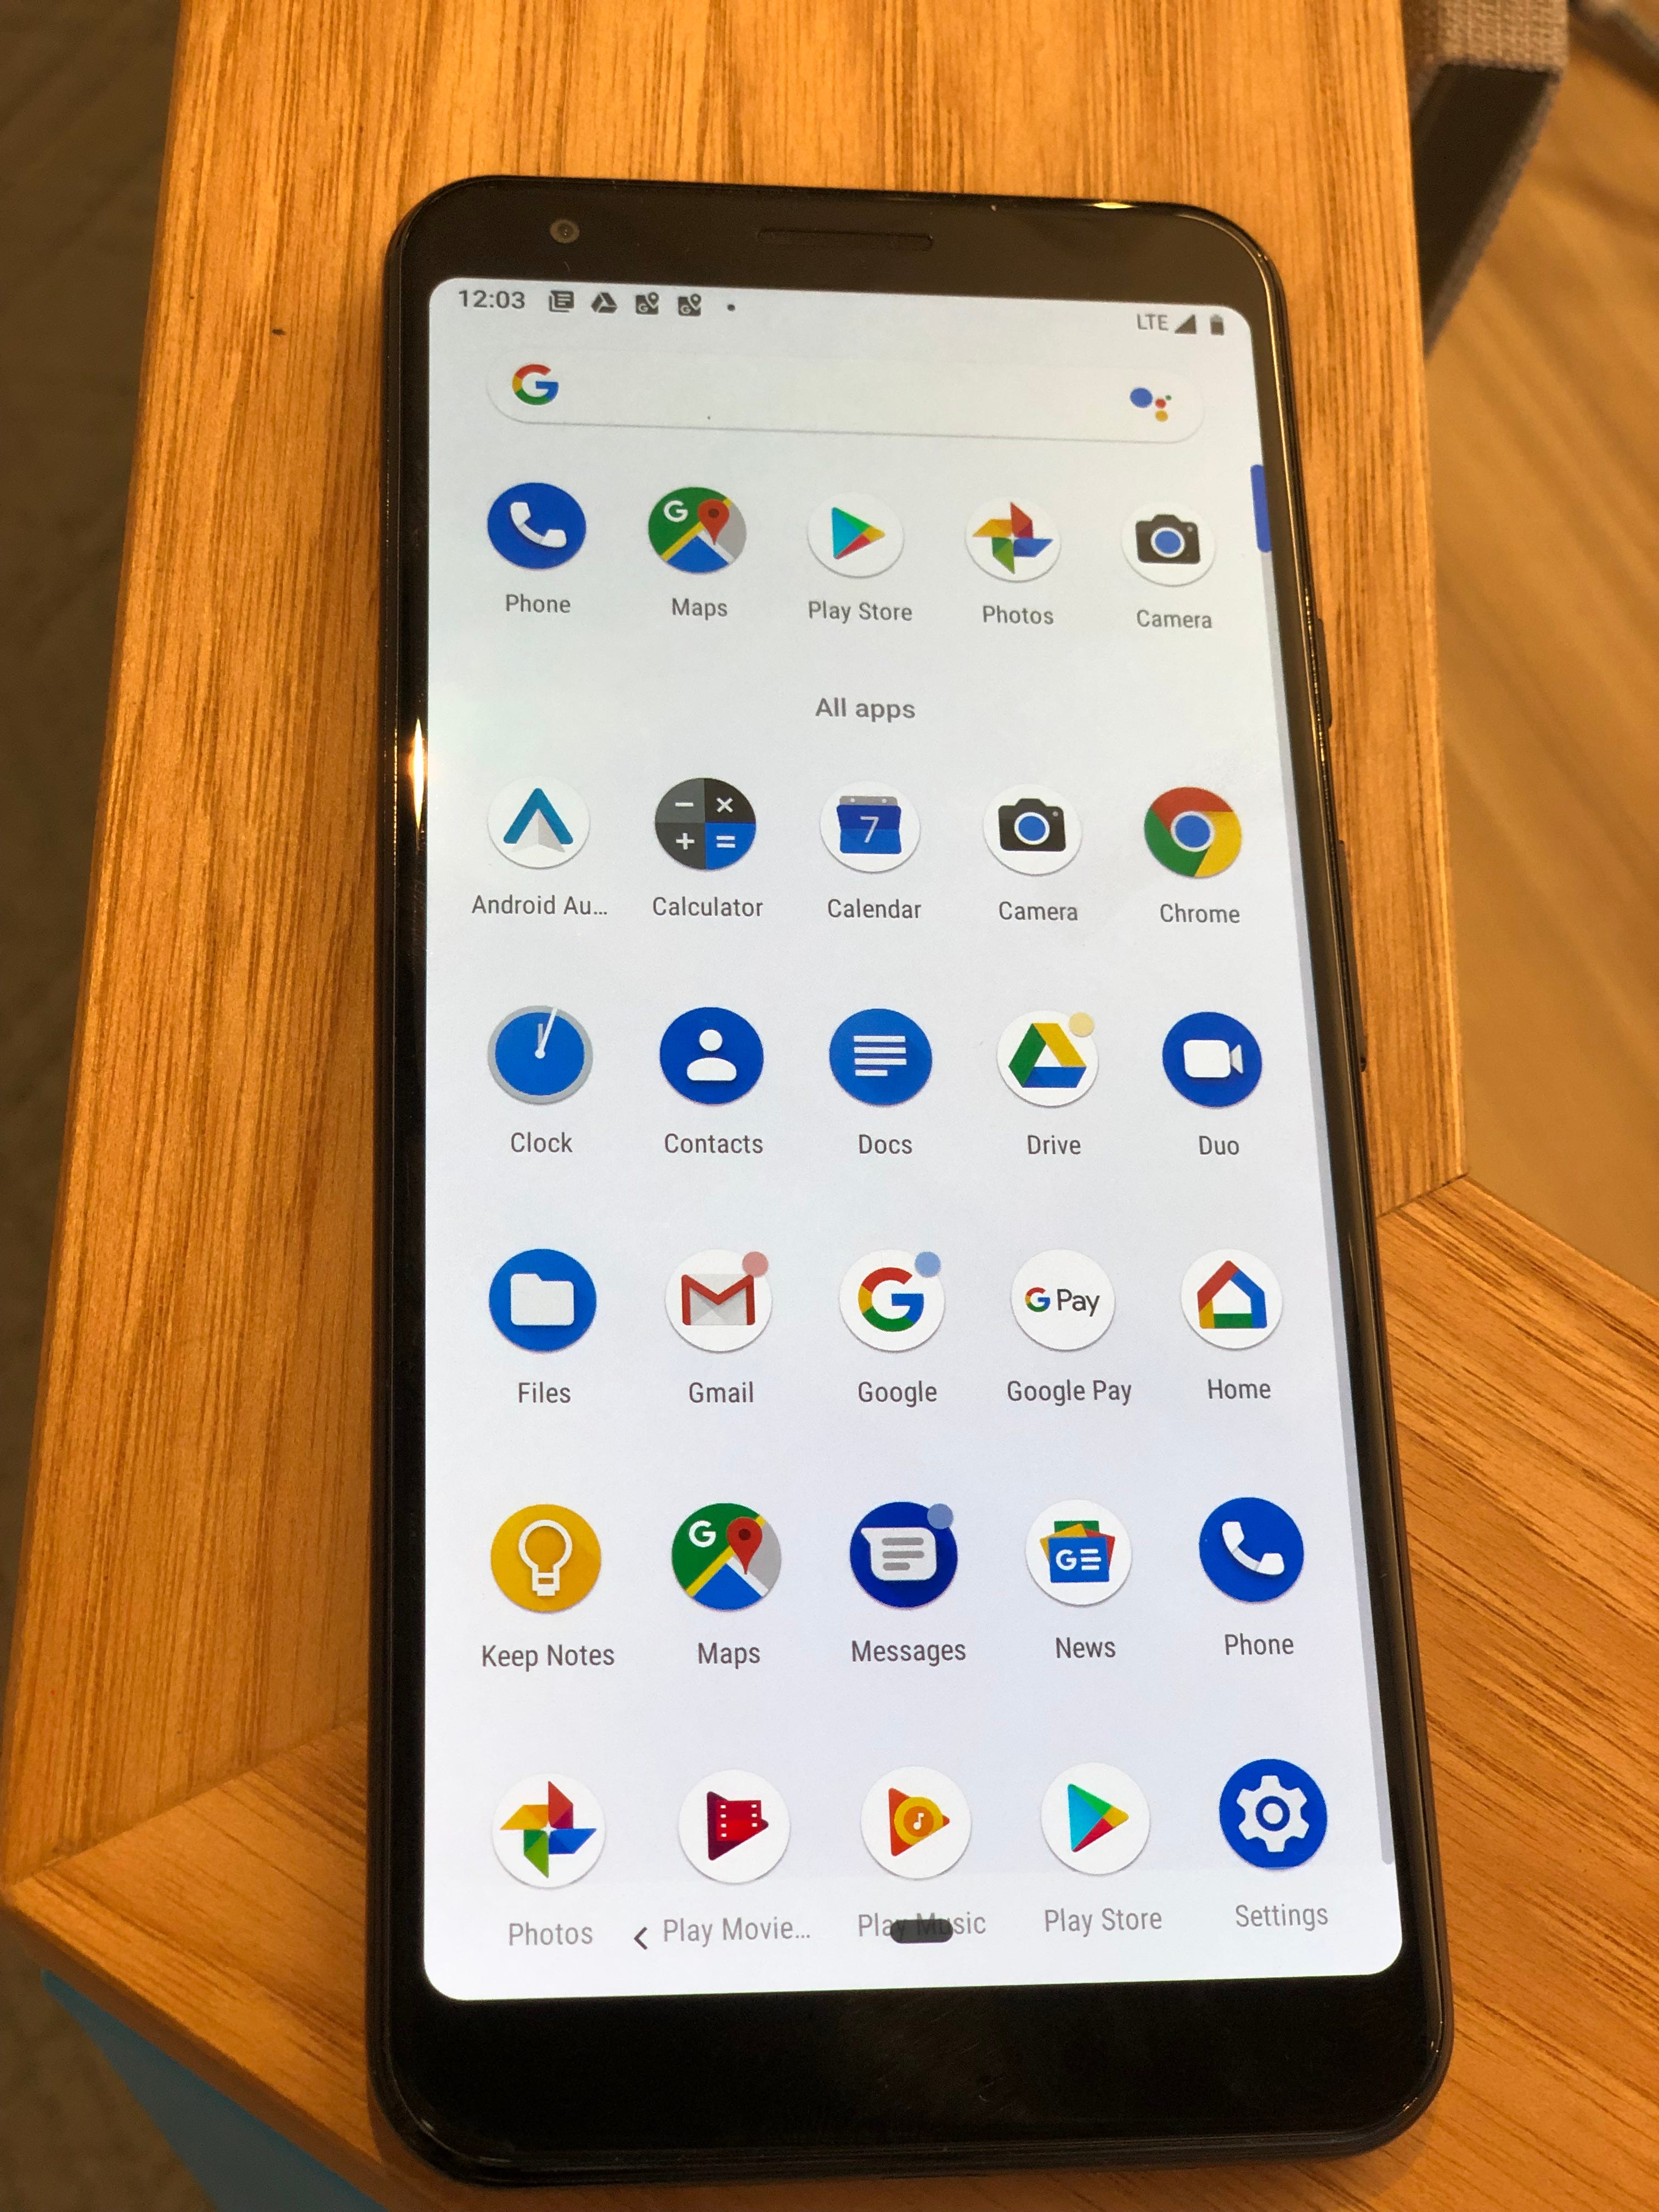 where can i buy the pixel 3